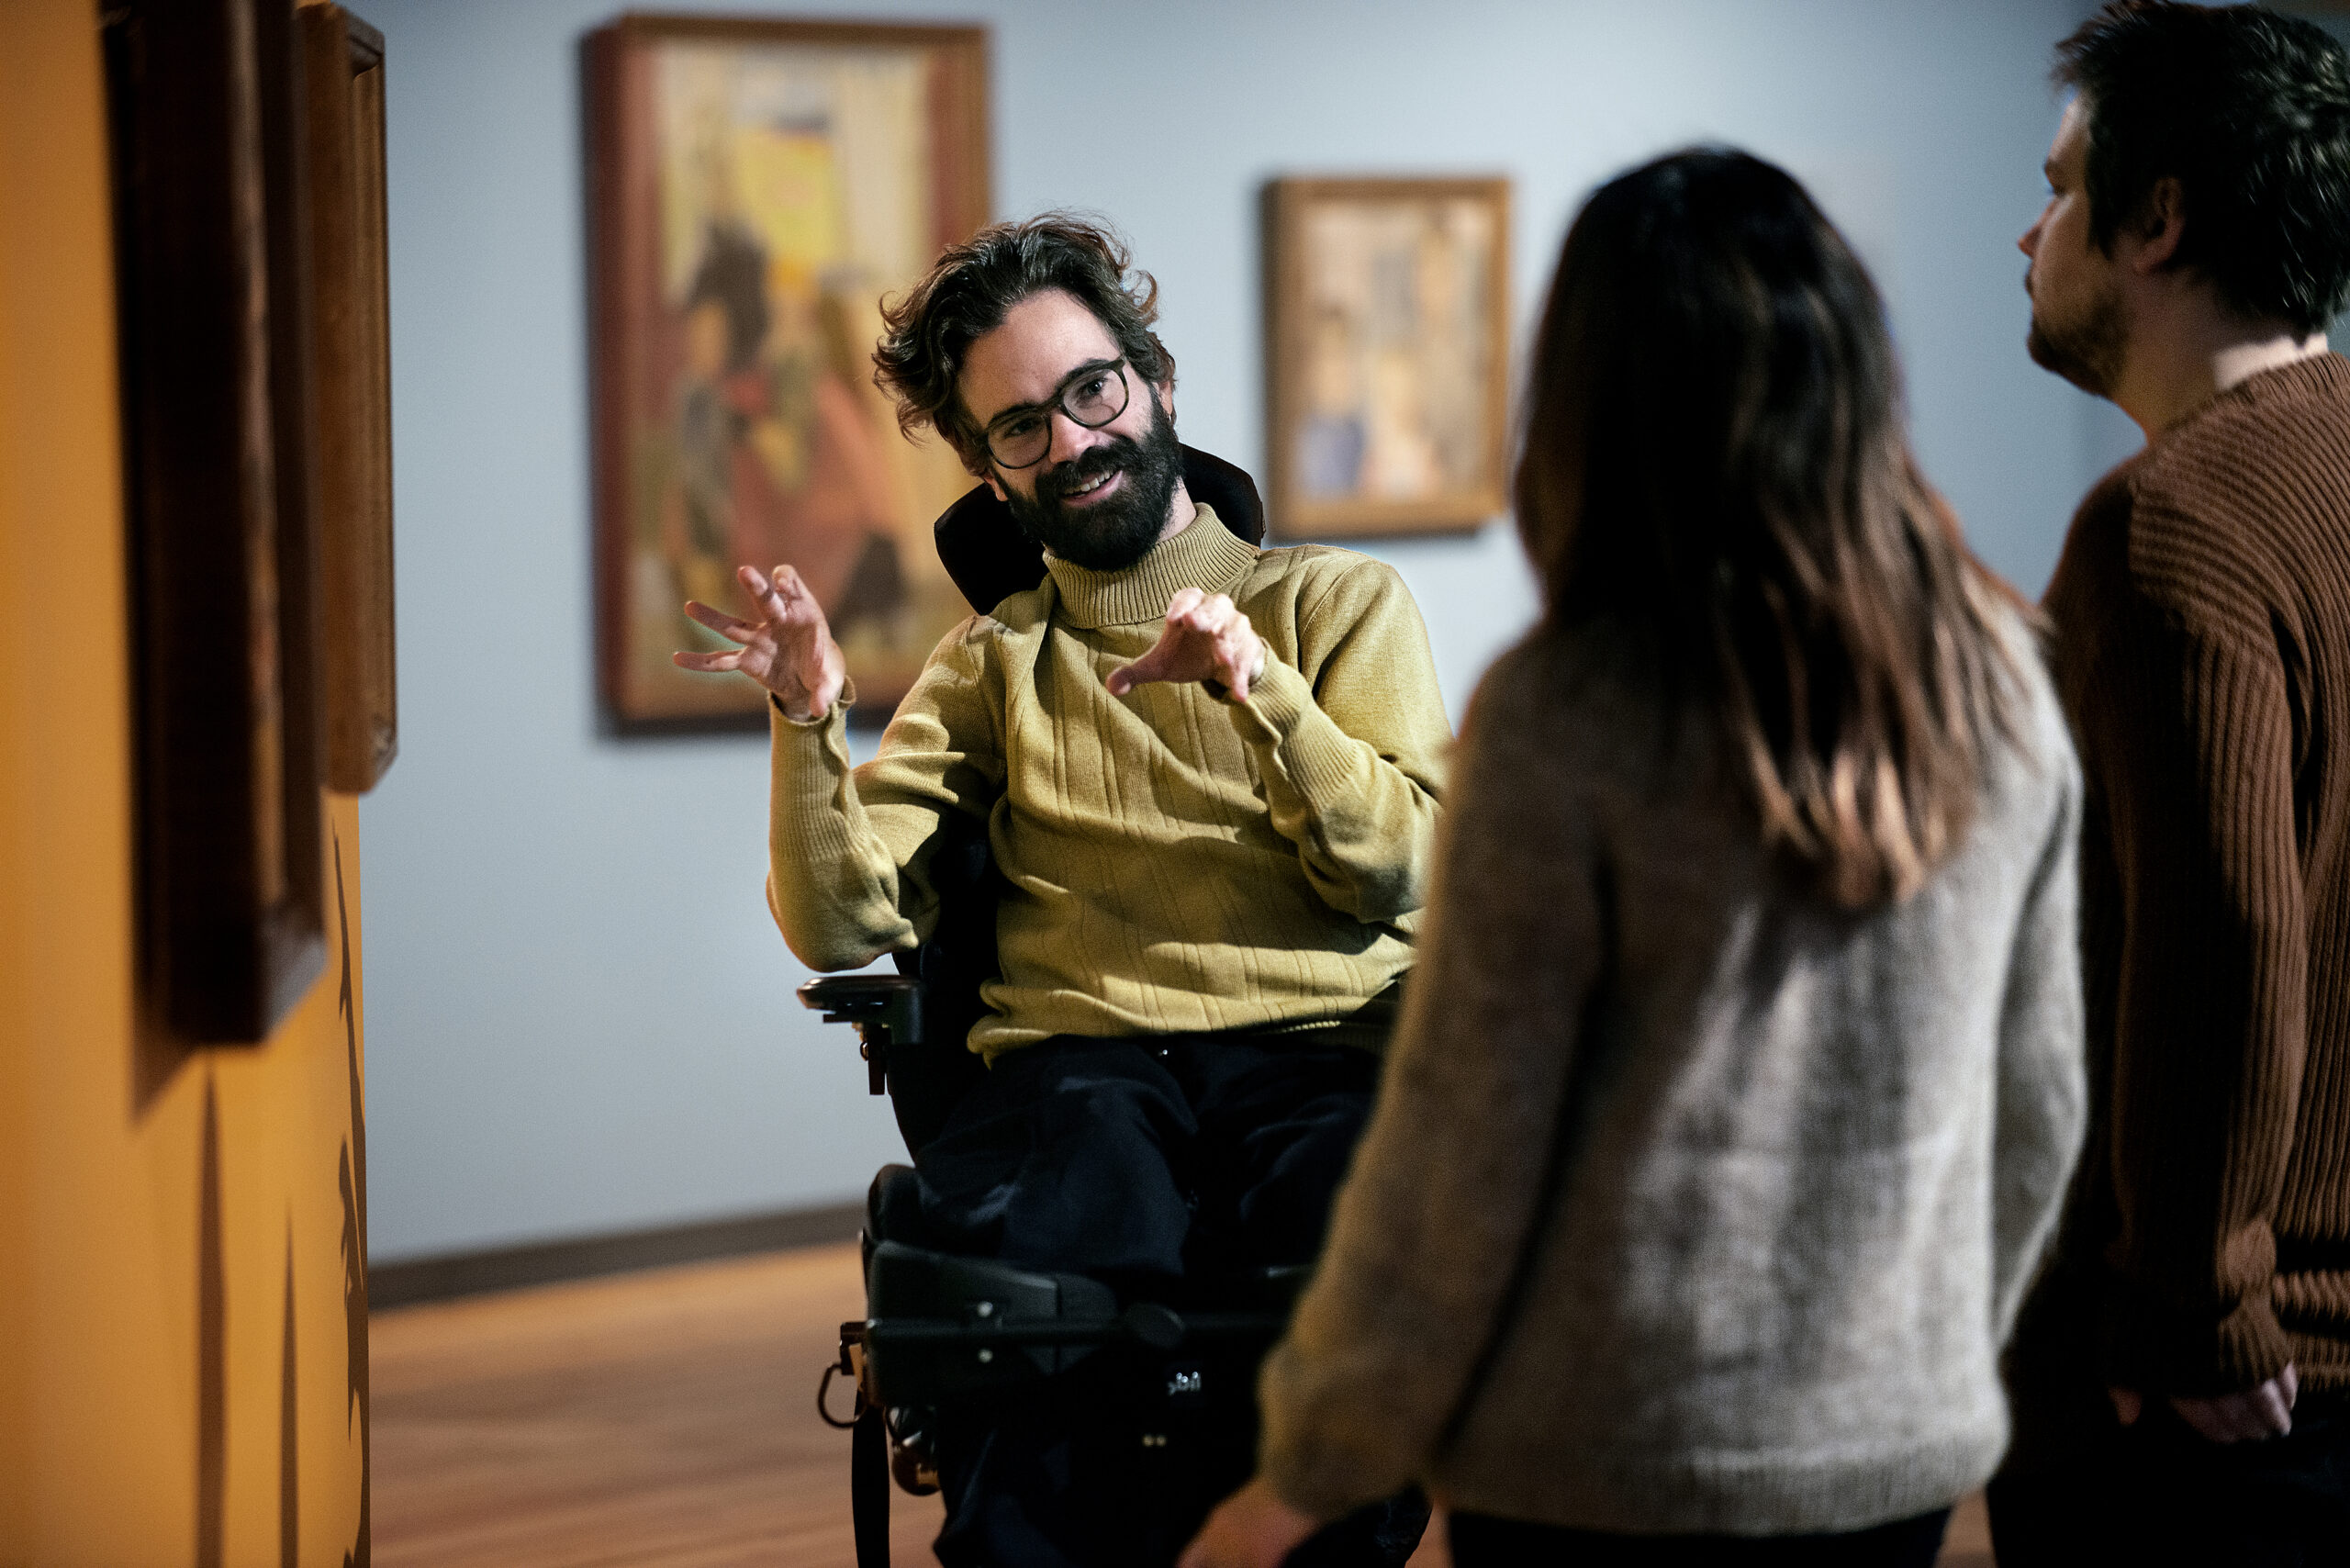 Disabled man in a wheelchair talking to two people in a gallery setting